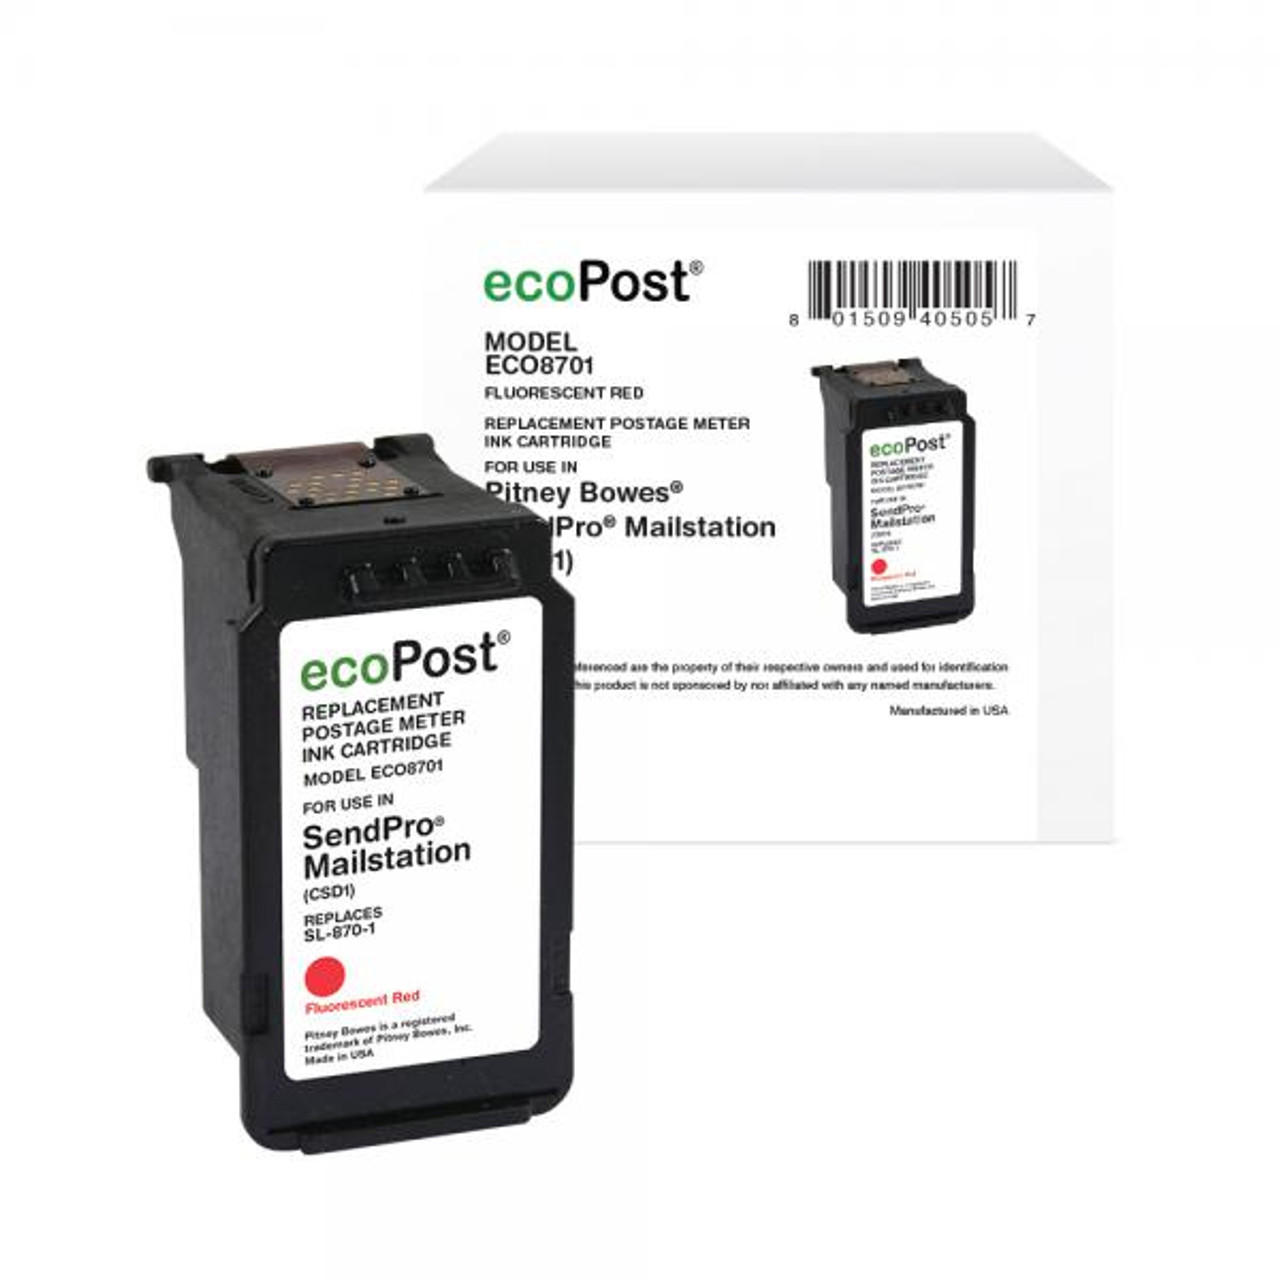 Postage Meter Red Ink Cartridge for Pitney Bowes SL-870-1-1